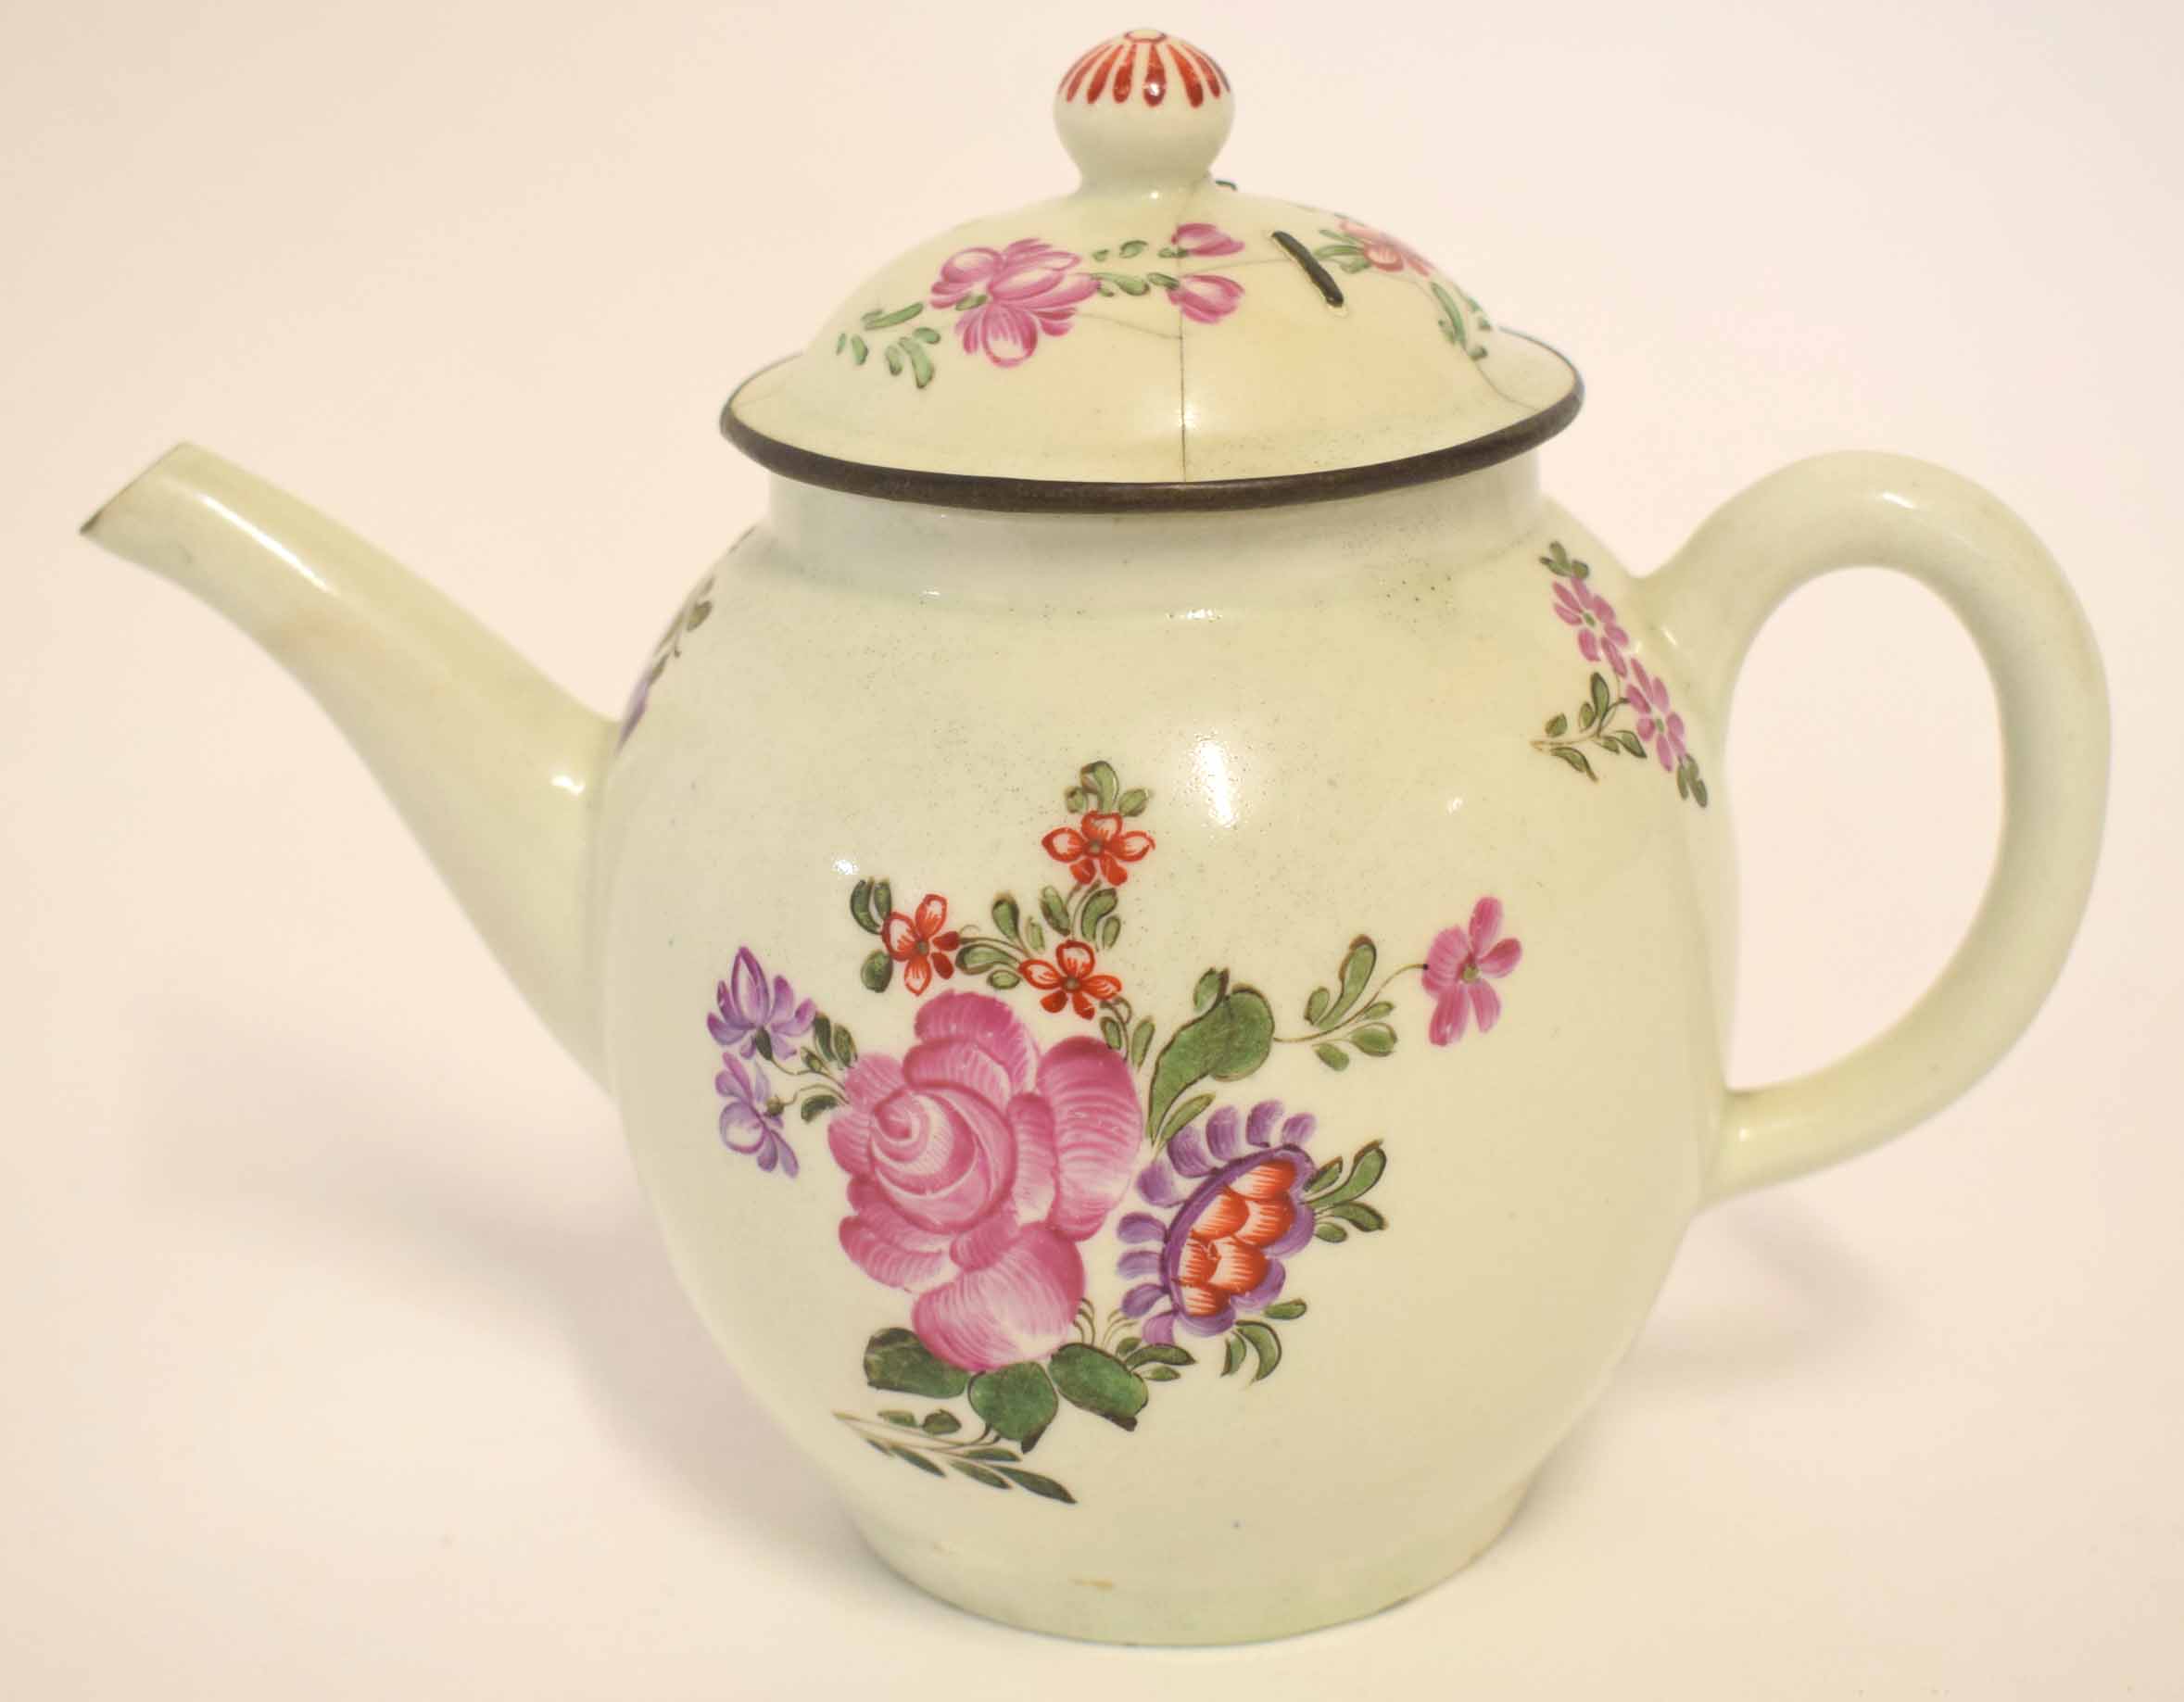 Lowestoft teapot, circa 1780, decorated in Compagnie-des-Indes style, the cover with button knop,